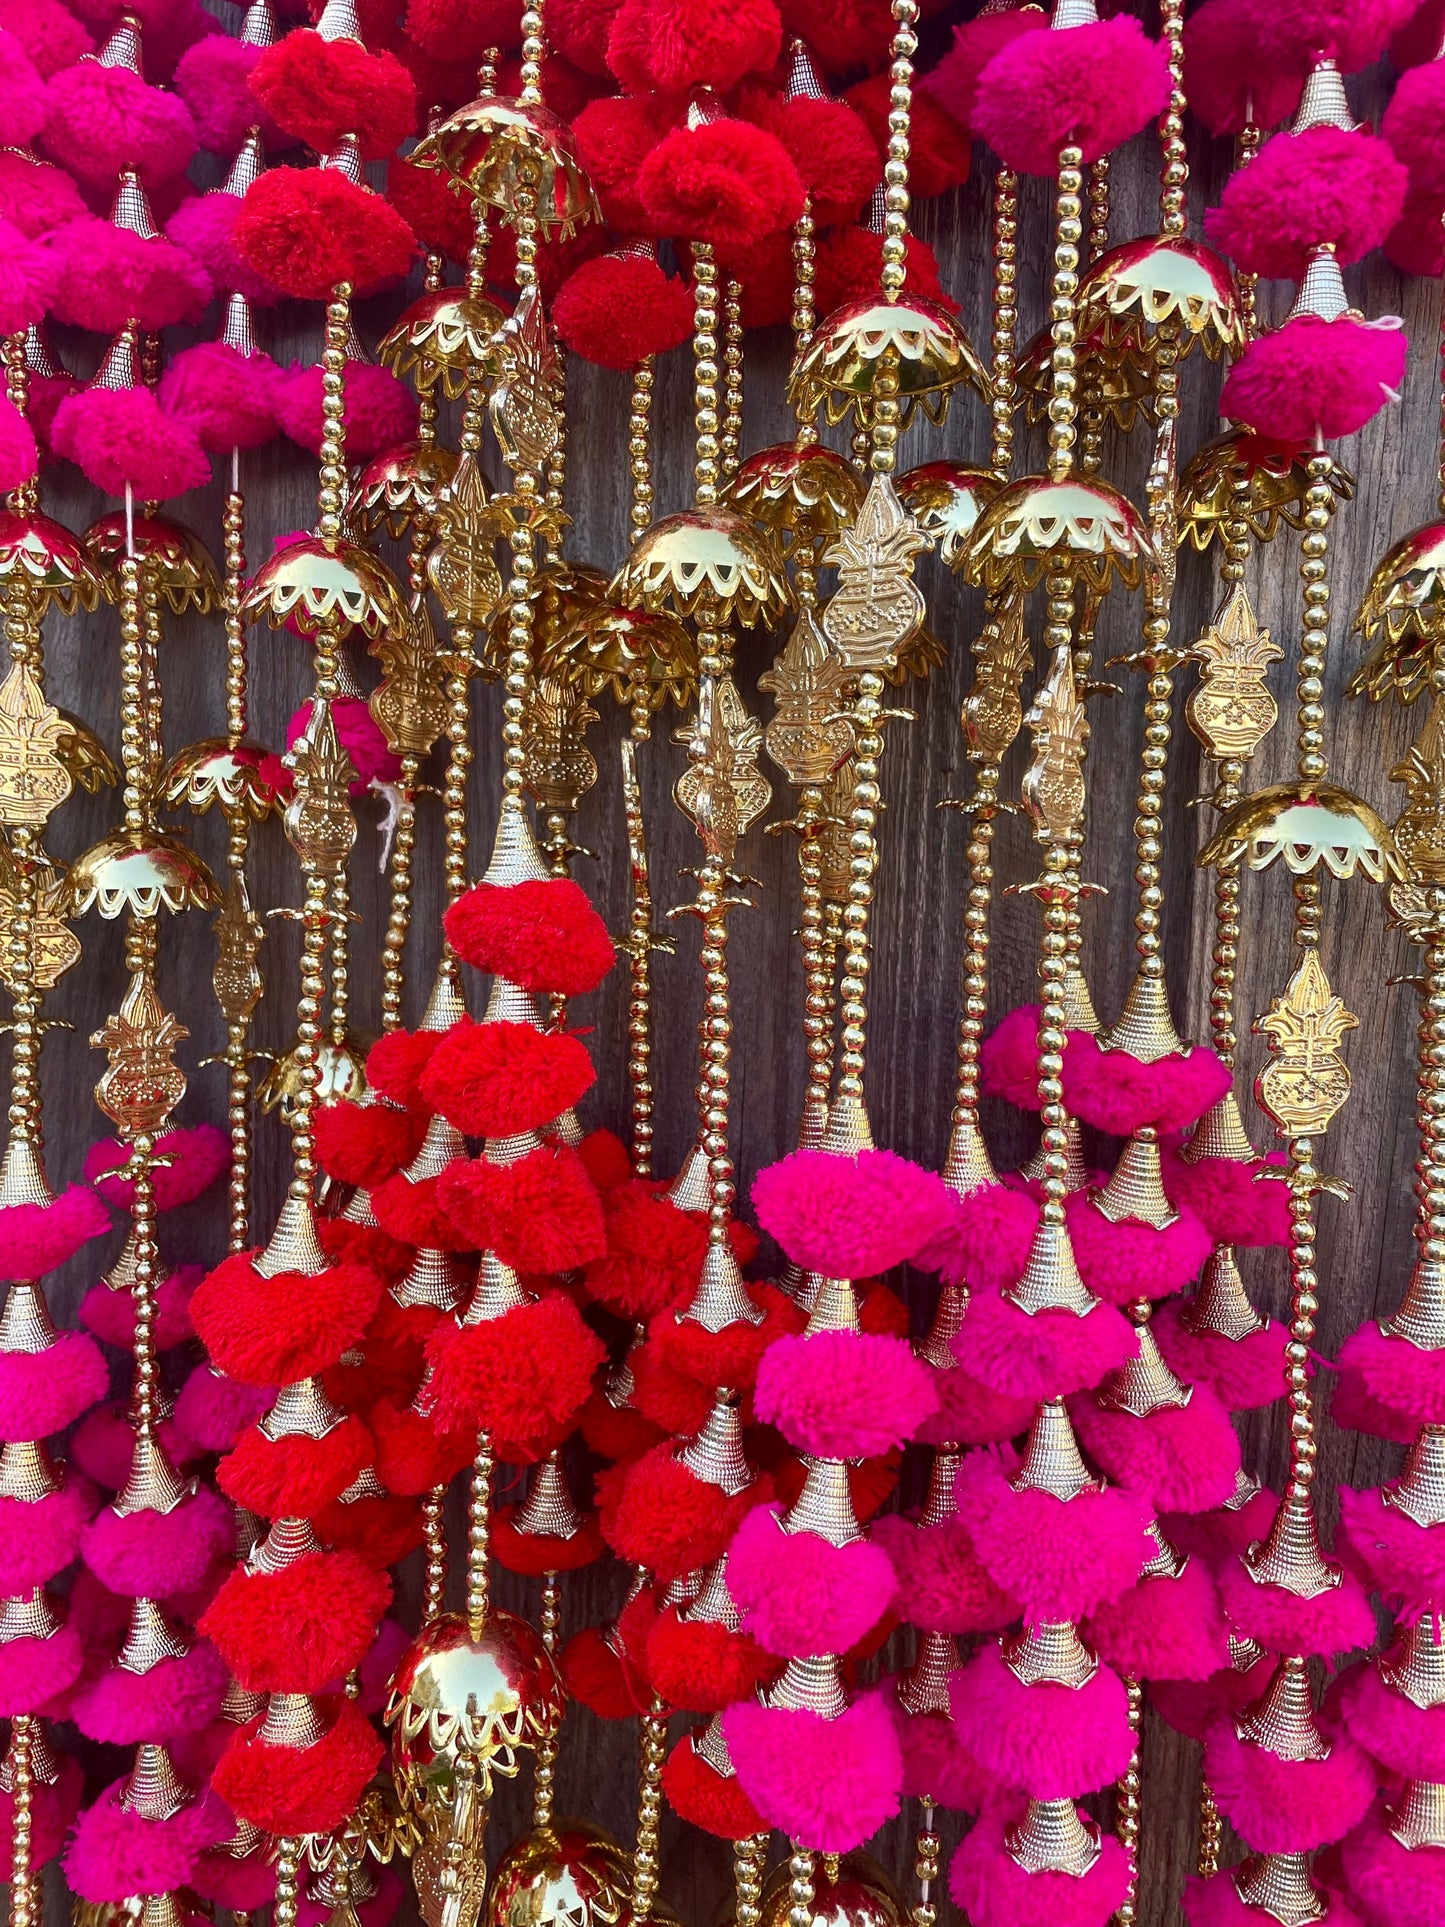 10 Red/Rani Pom Pom Kalash Hanging Strings for Diwali Mehndi Garden Party Decoration Outdoor Backdrops Event Weddings Home Decor New Home